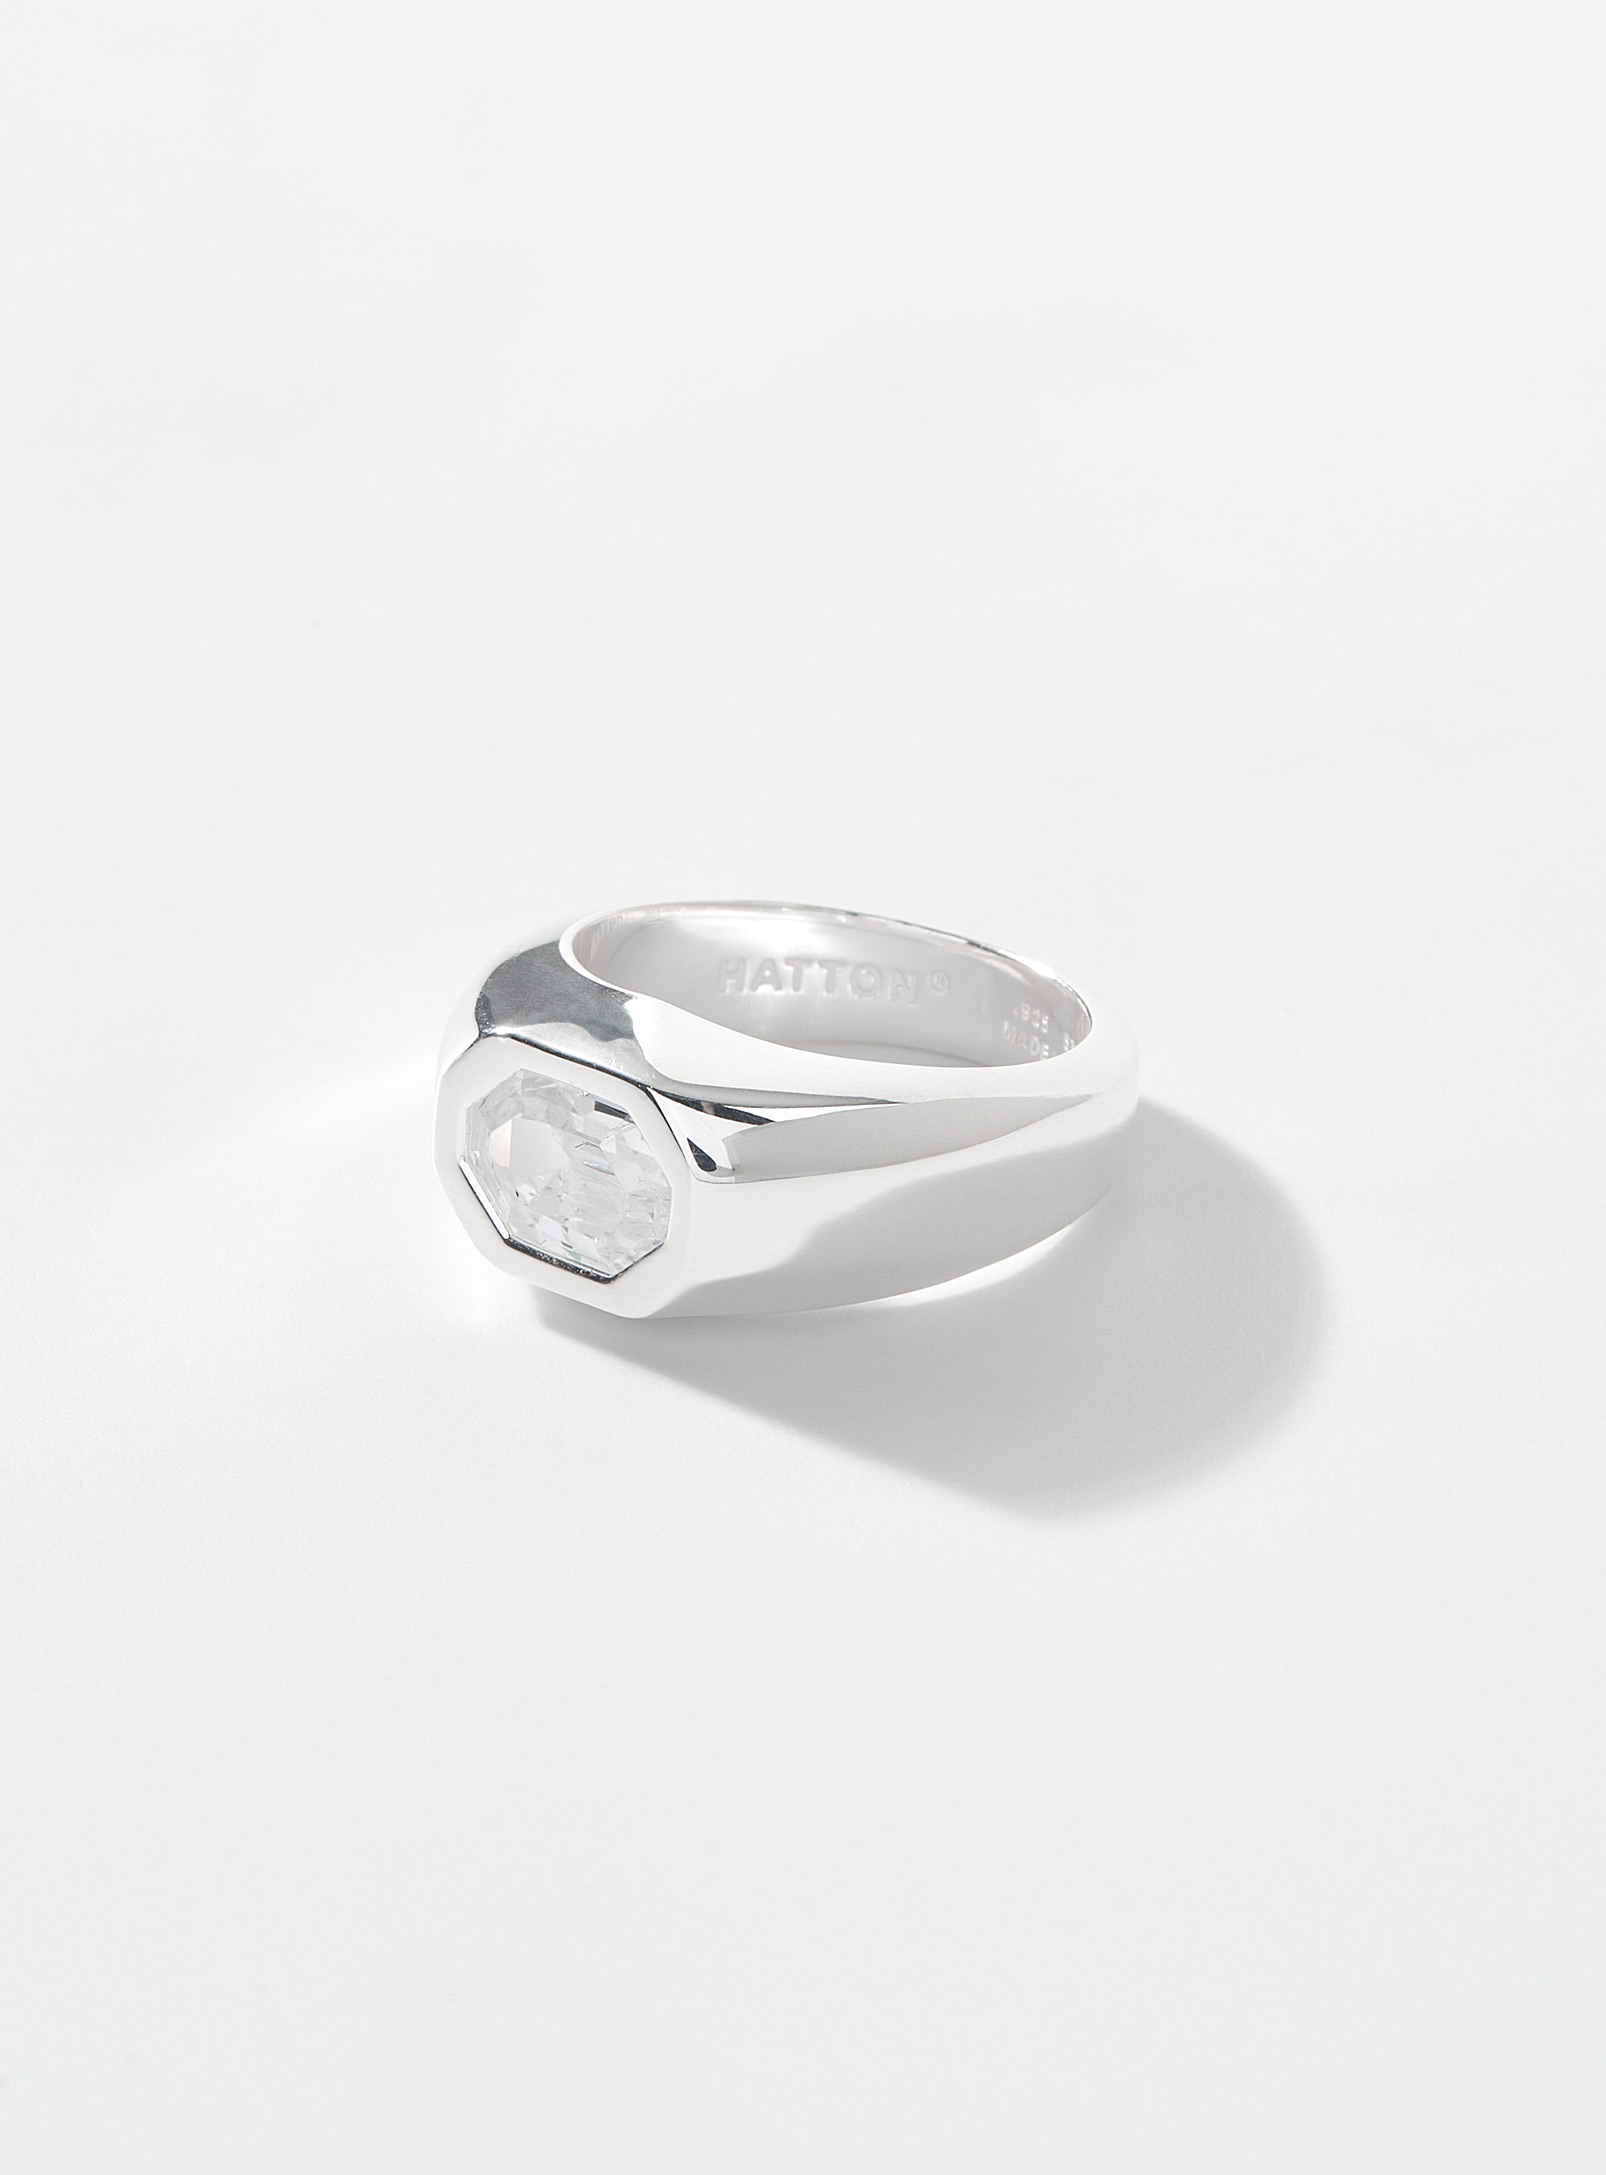 Hatton Labs Solitaire Signet Ring In Silver